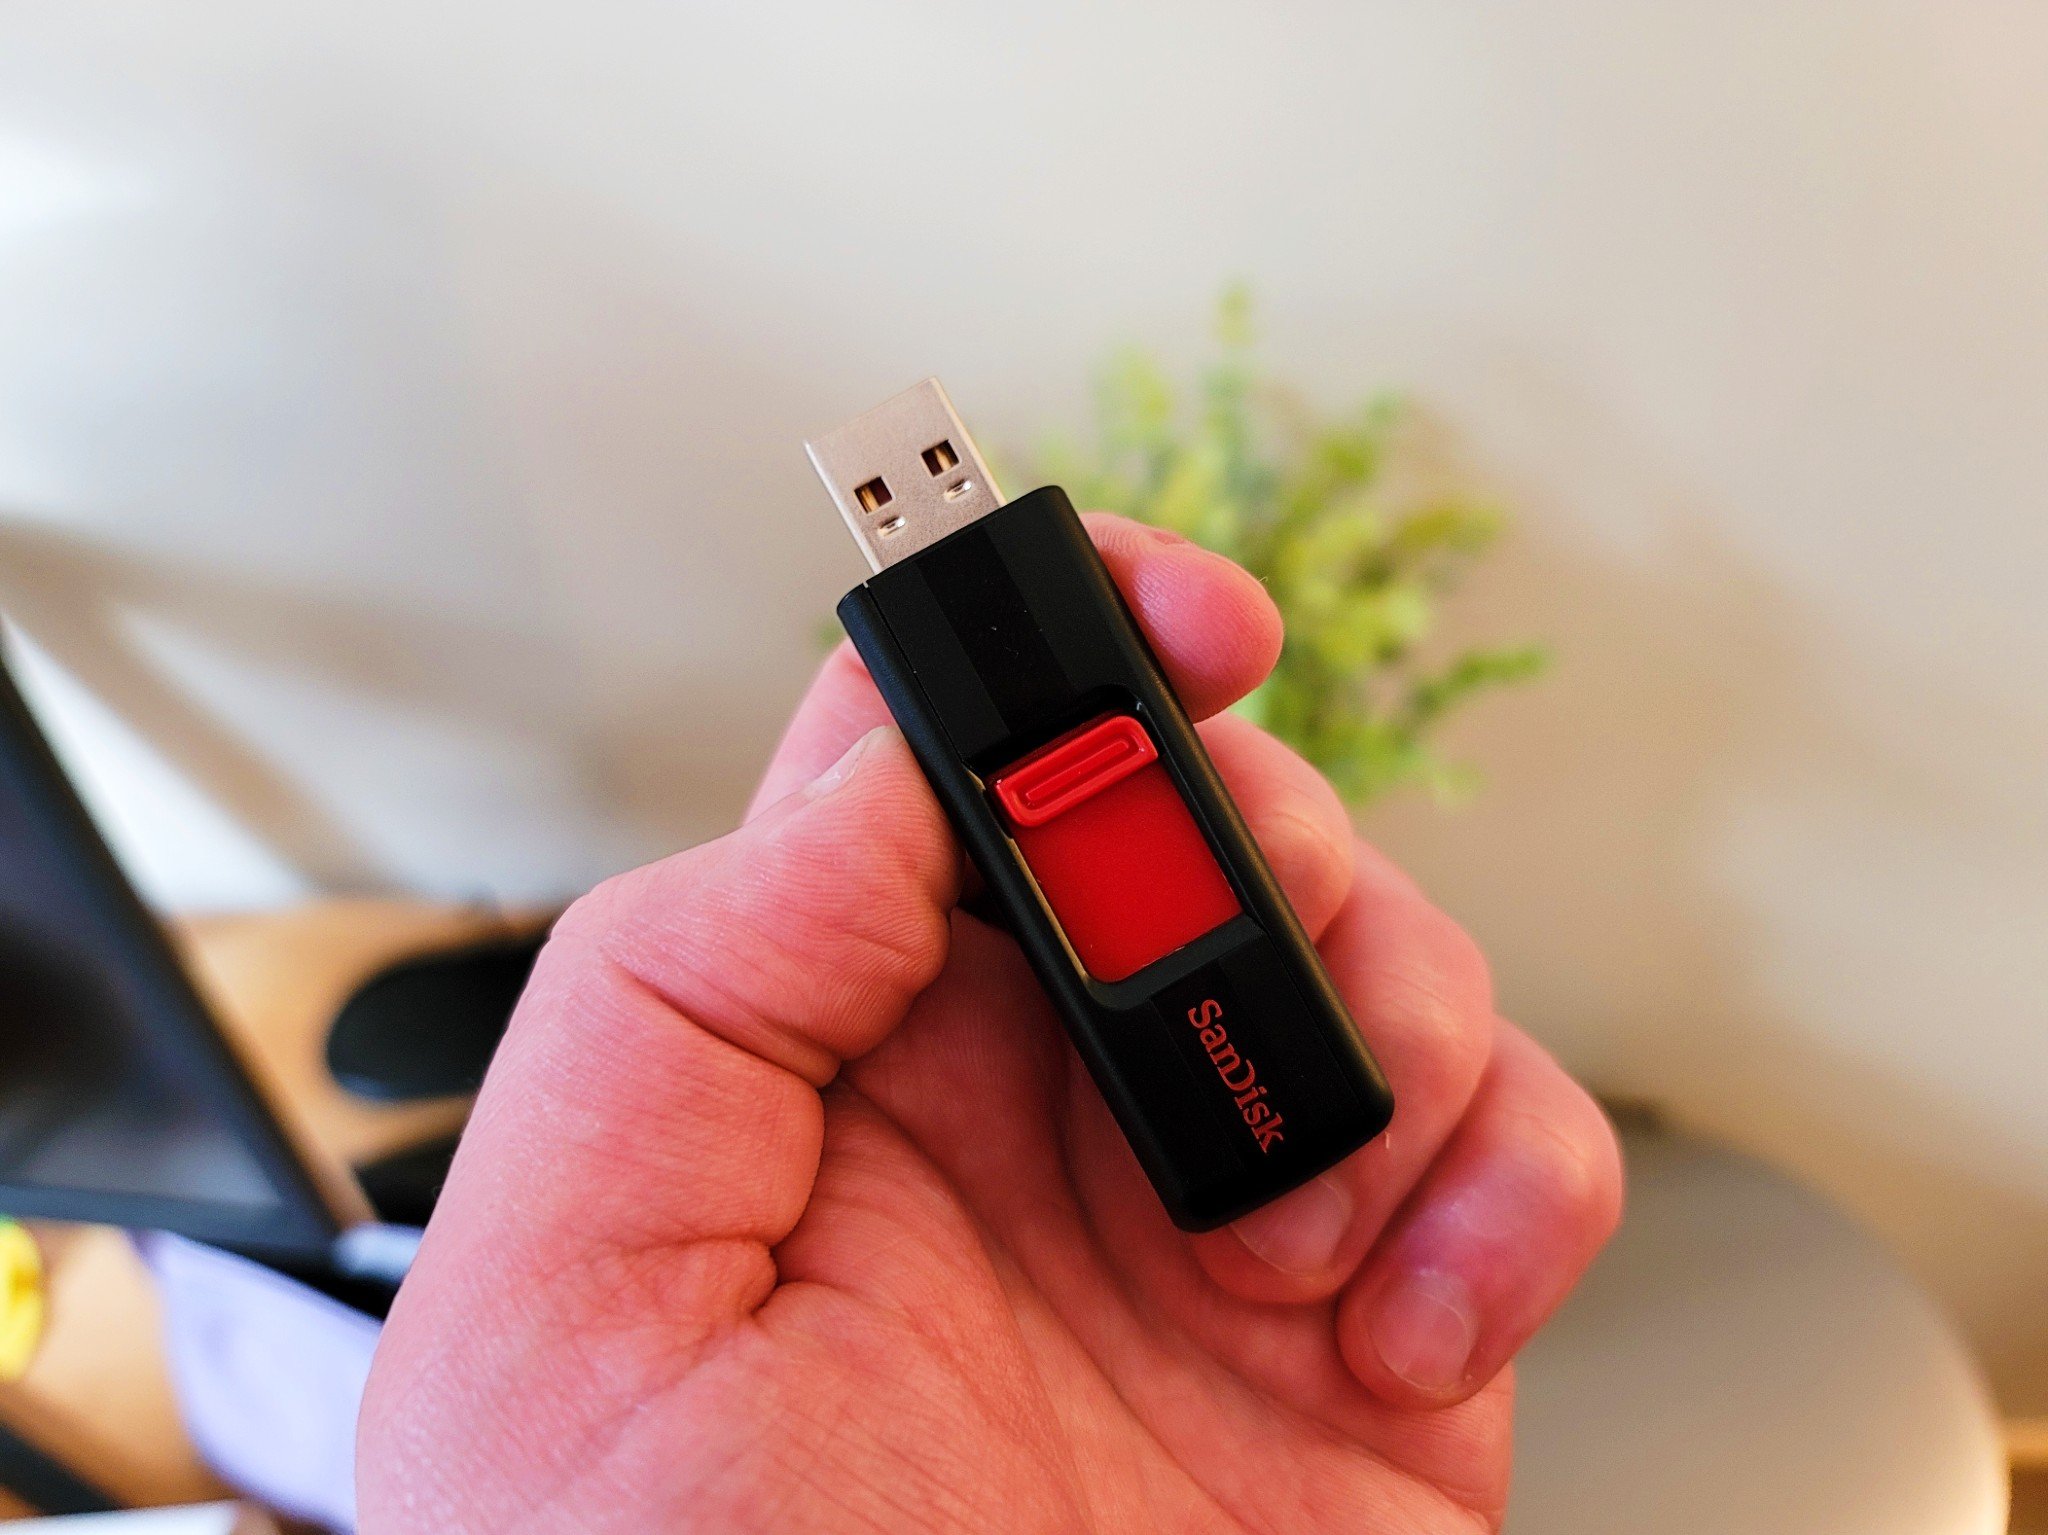 SanDisk Cruzer USB 2.0 review: Slow speeds make this reliable